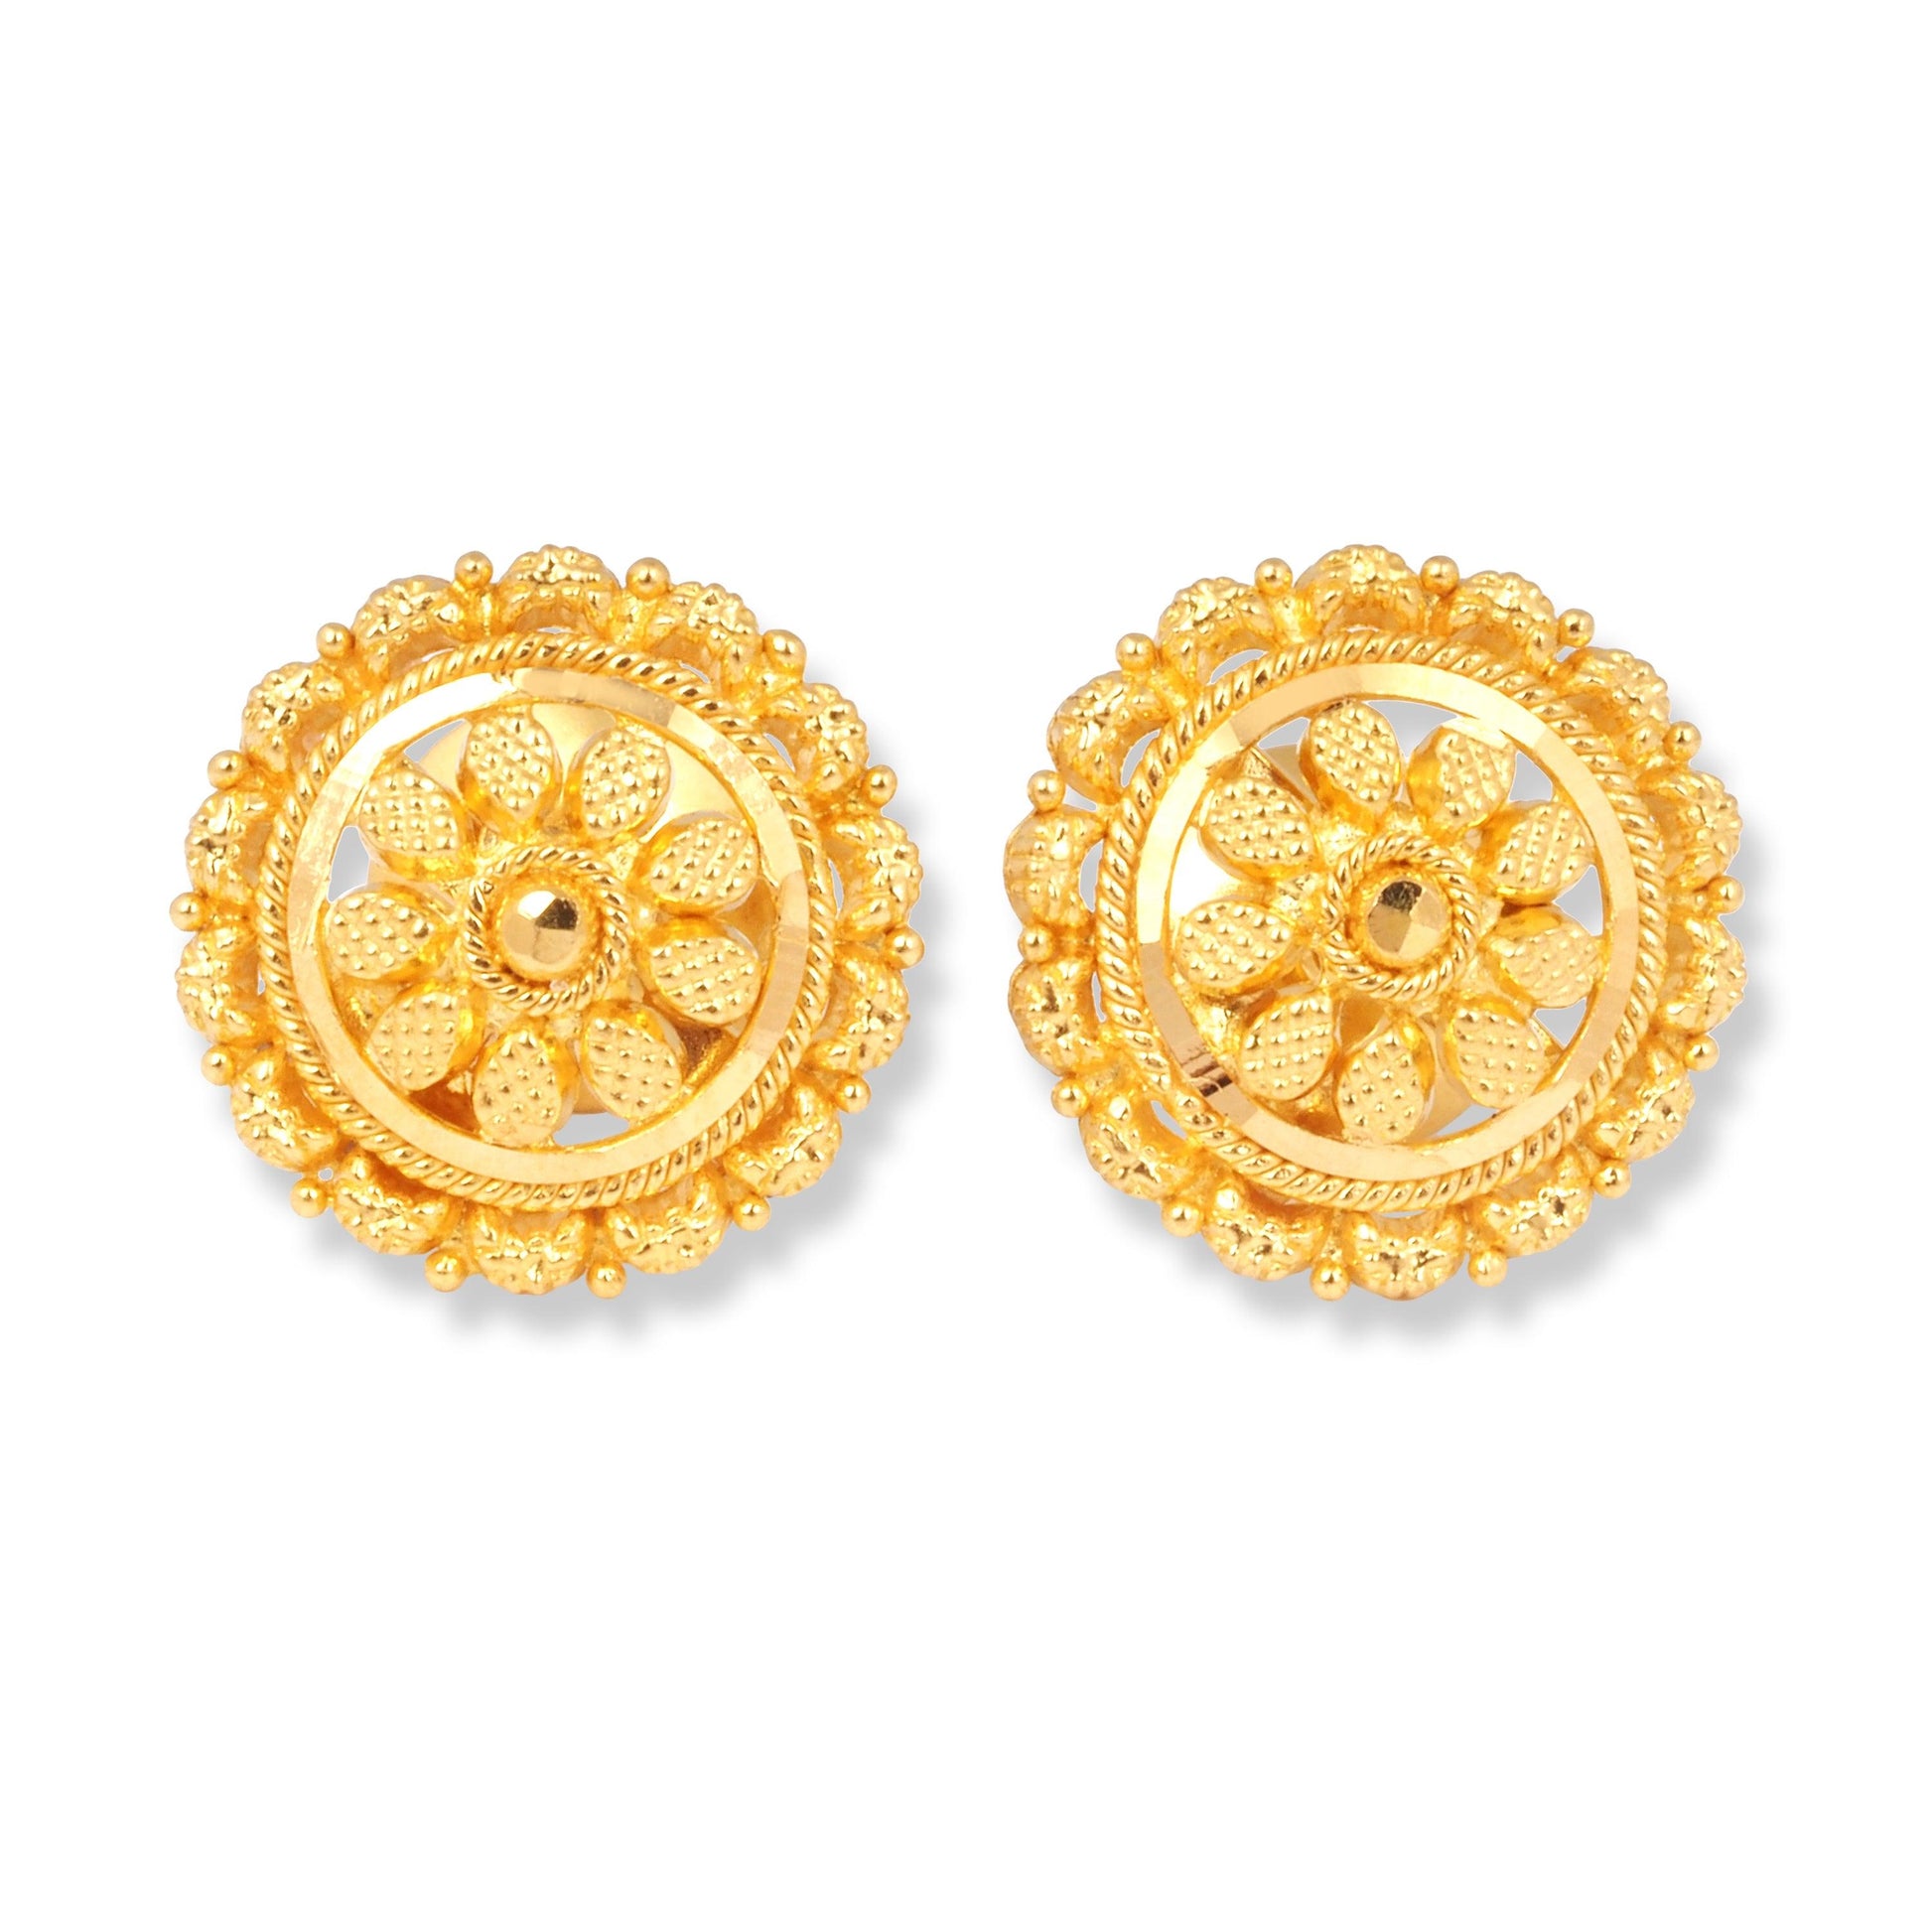 22ct Gold Earrings with Filigree Design (3.7g) E-7883 - Minar Jewellers